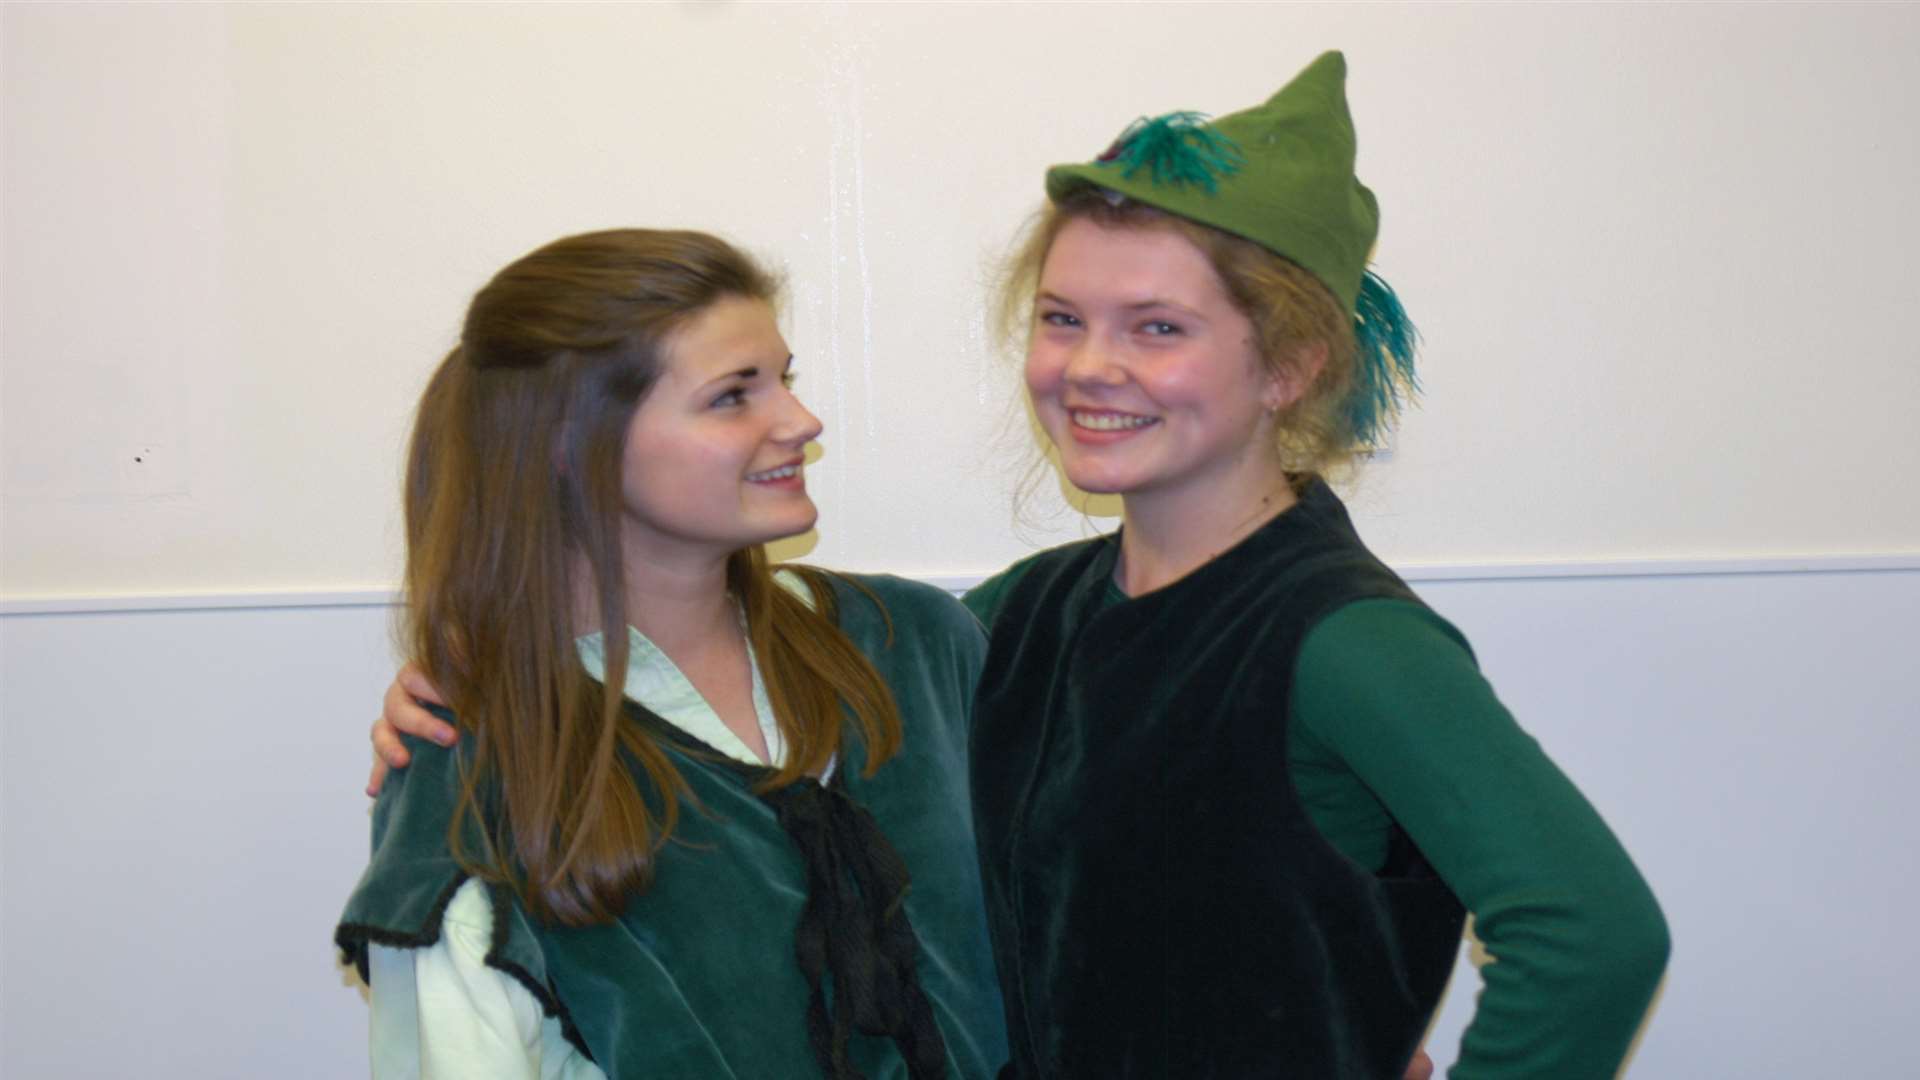 Bethany Kingston as Robin Hood and Kirsten Barr as Maid Marion